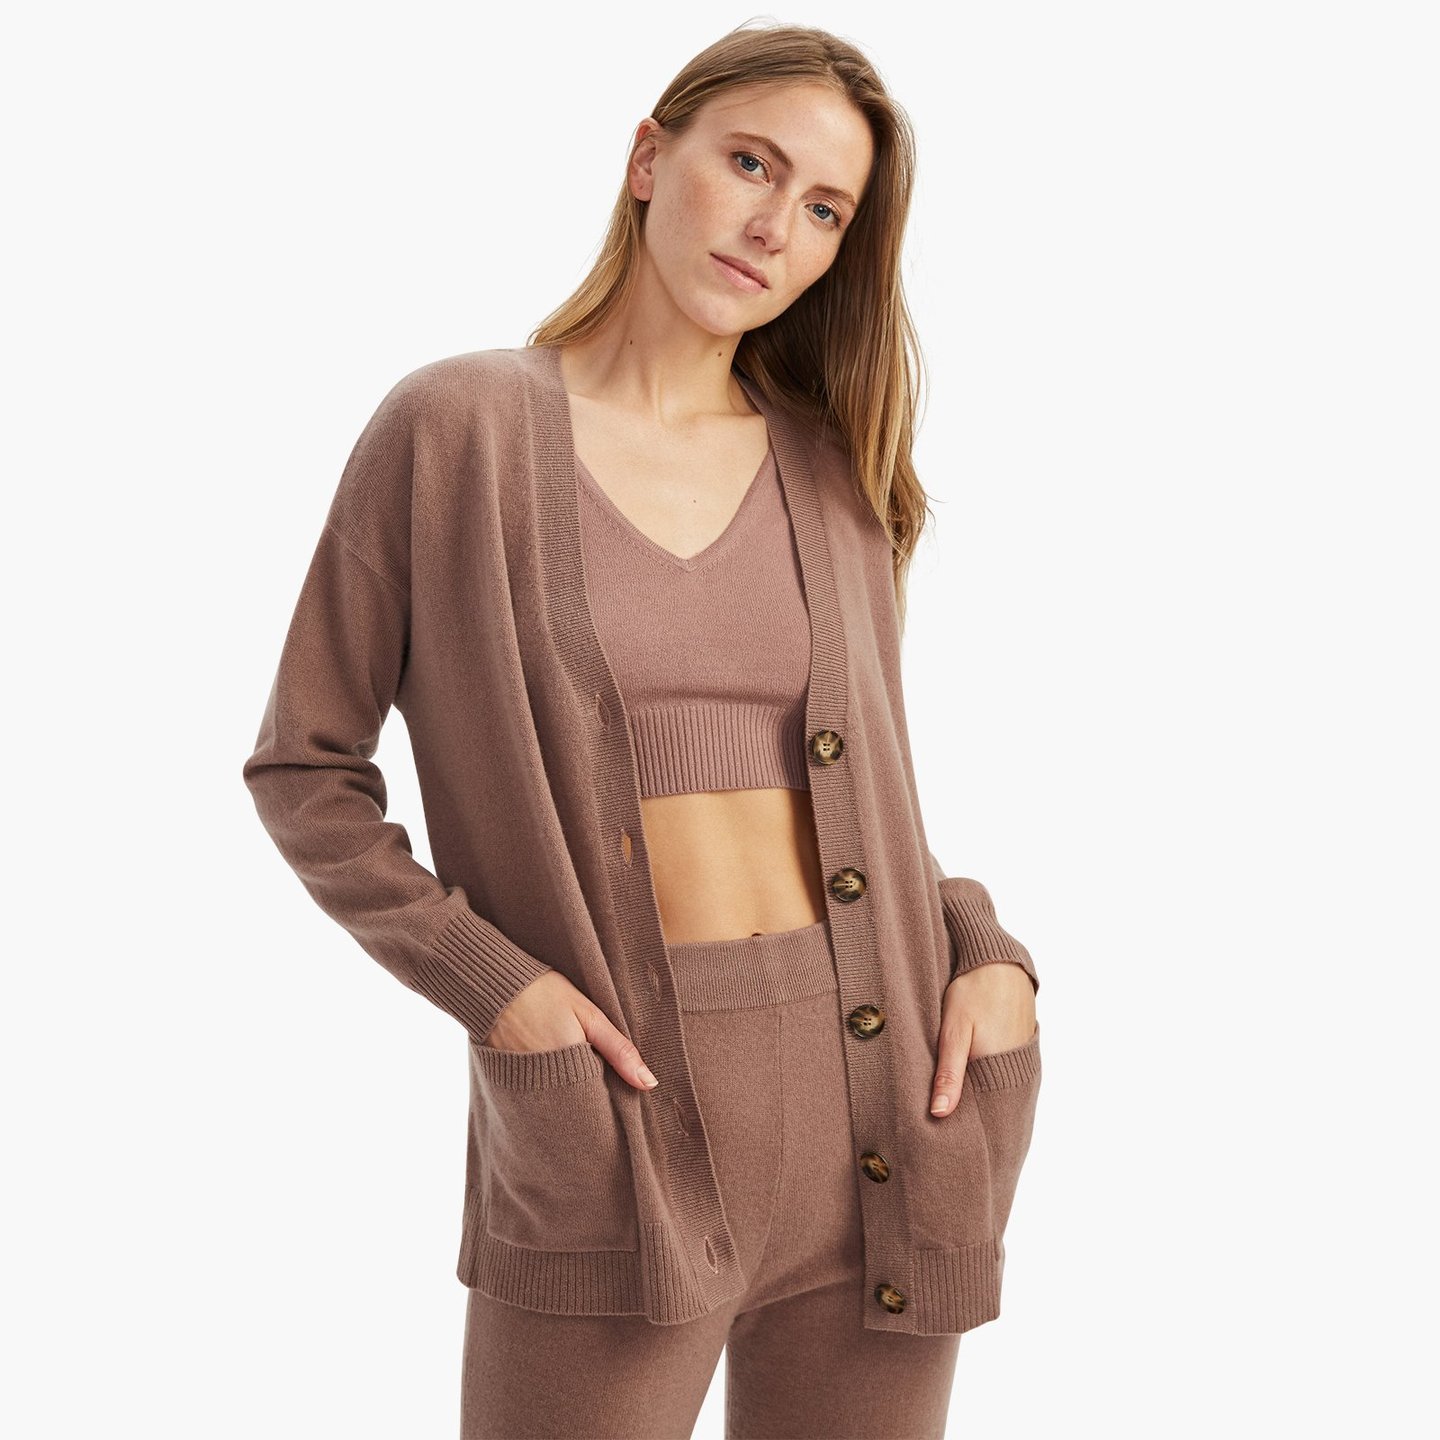 Is Quince's Cashmere Cardigan As Good As Jenni Kayne's? - The Mom Edit